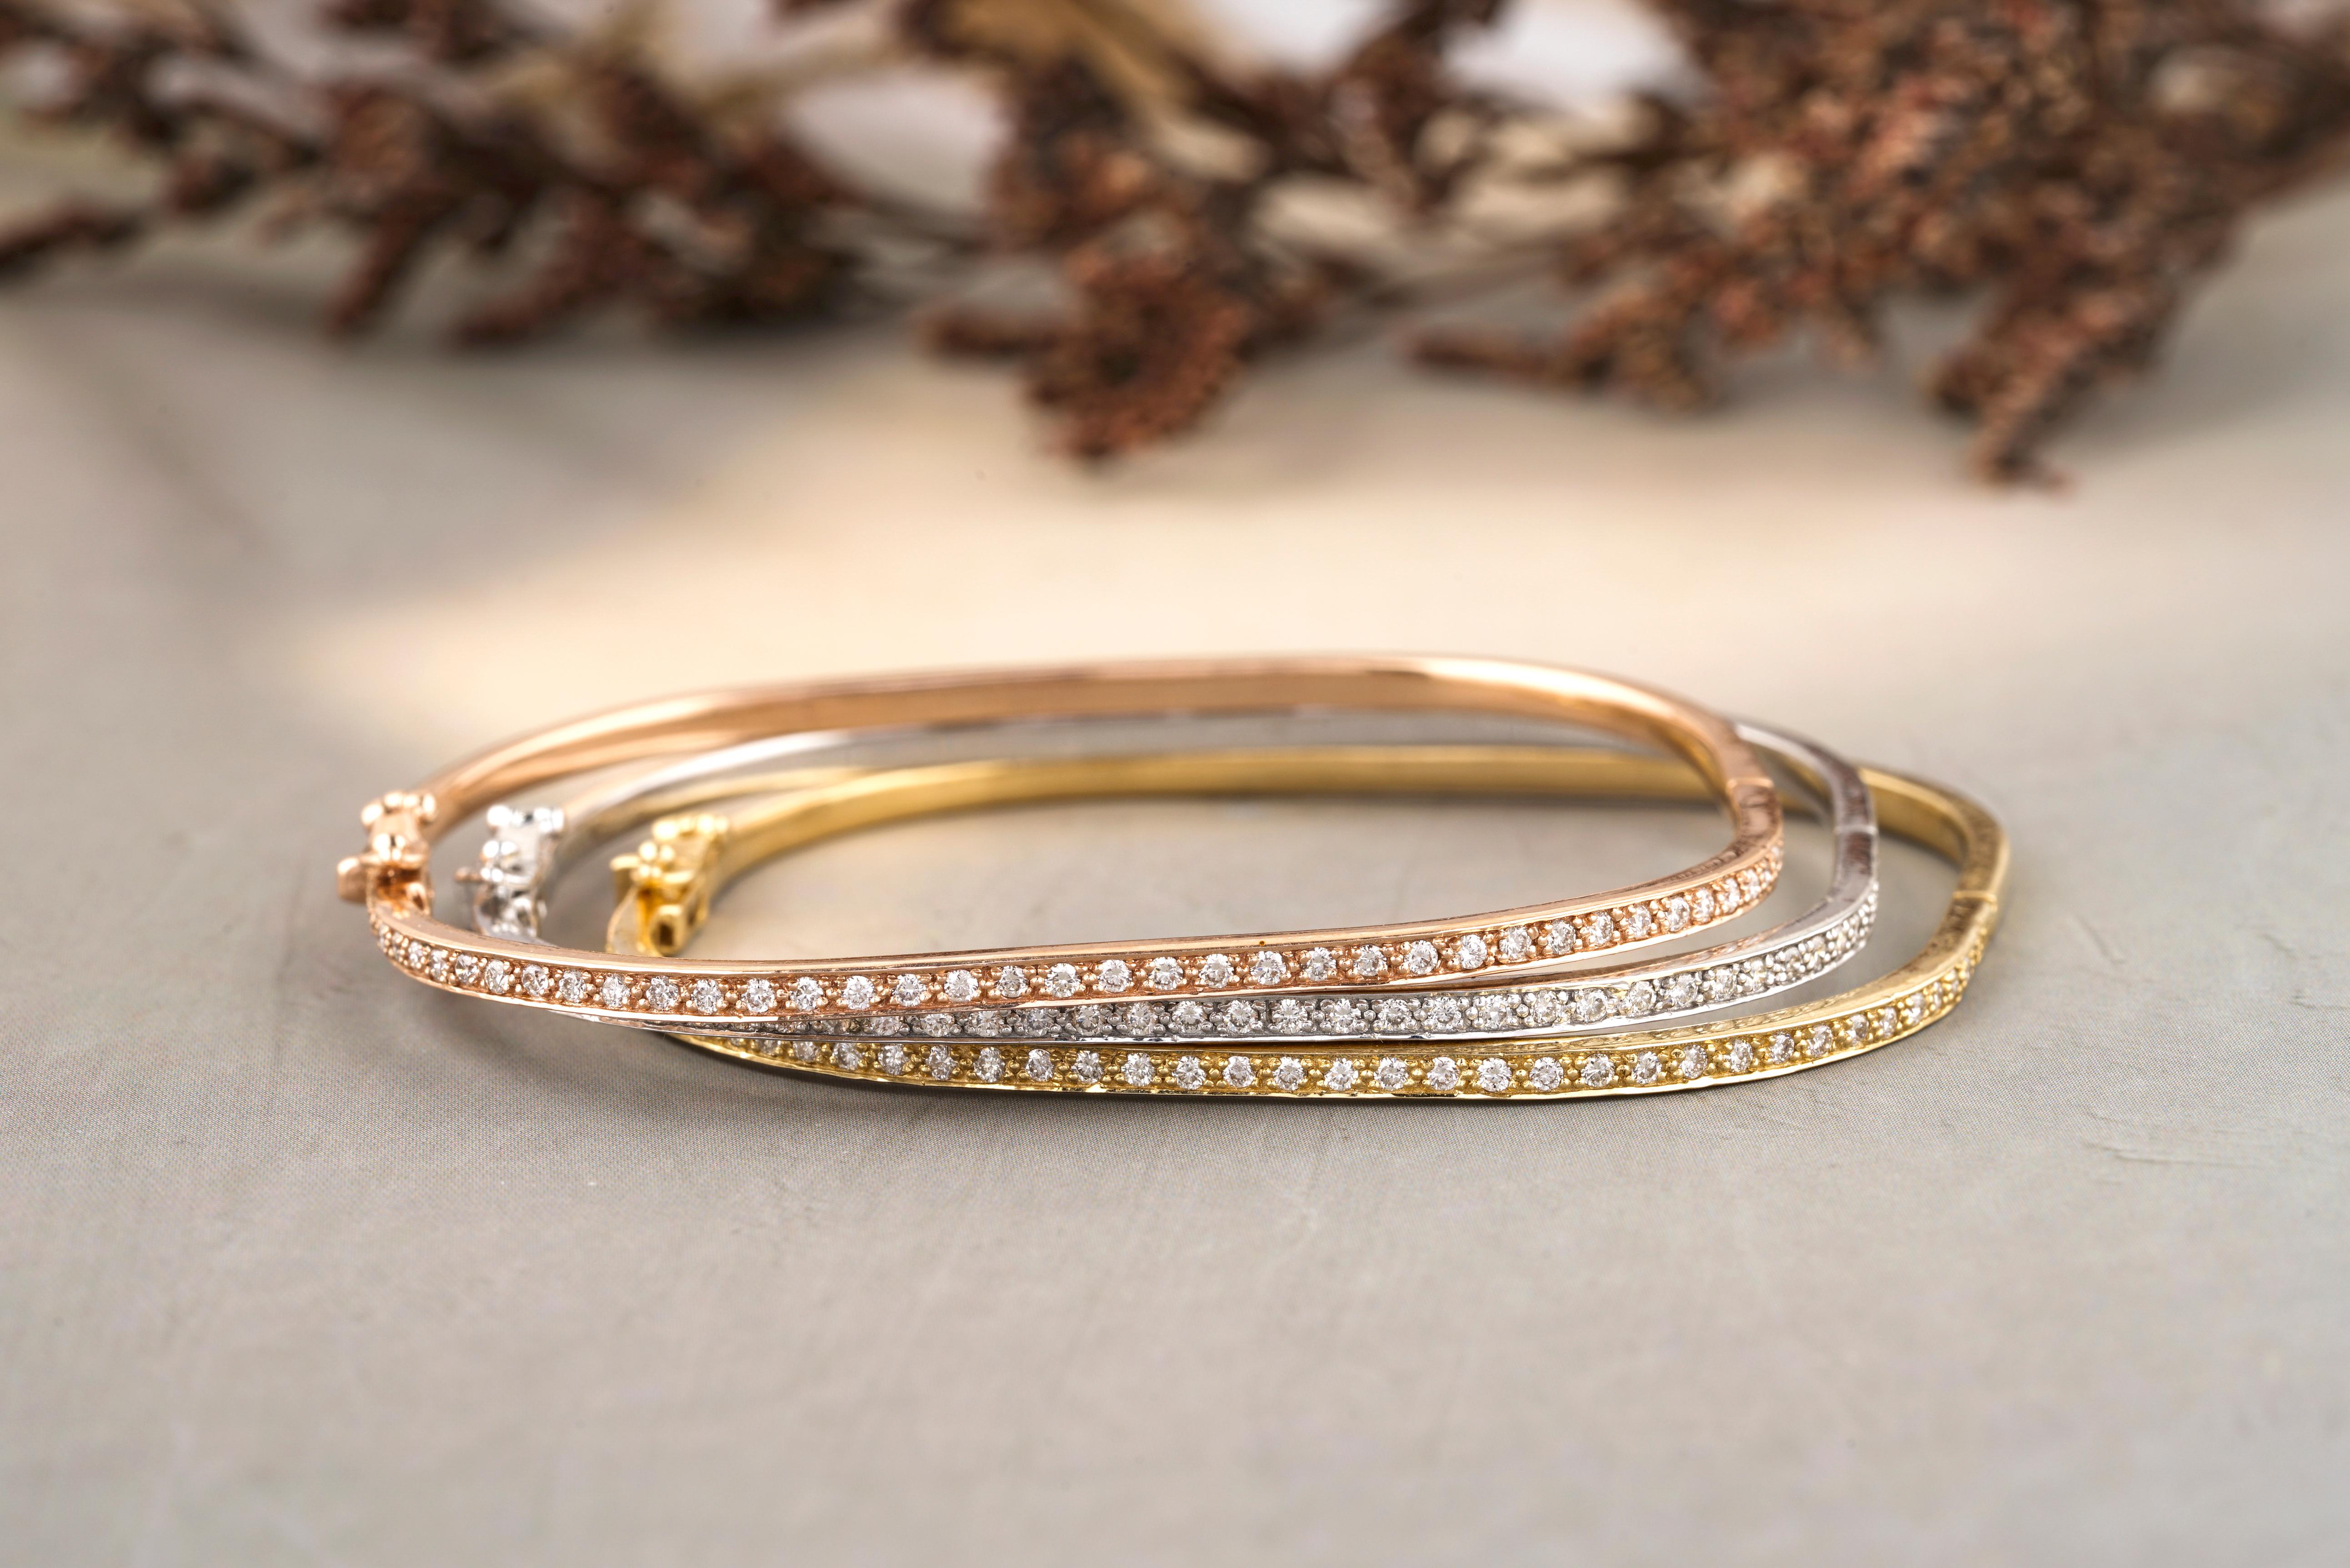 Square Shape Bangle Bracelet meticulously crafted from 18k solid gold. The bangle exhibit a graceful simplicity, featuring a slim design that is both modern and timeless. Bracelet is adorned with a single row of round-cut diamonds, set closely